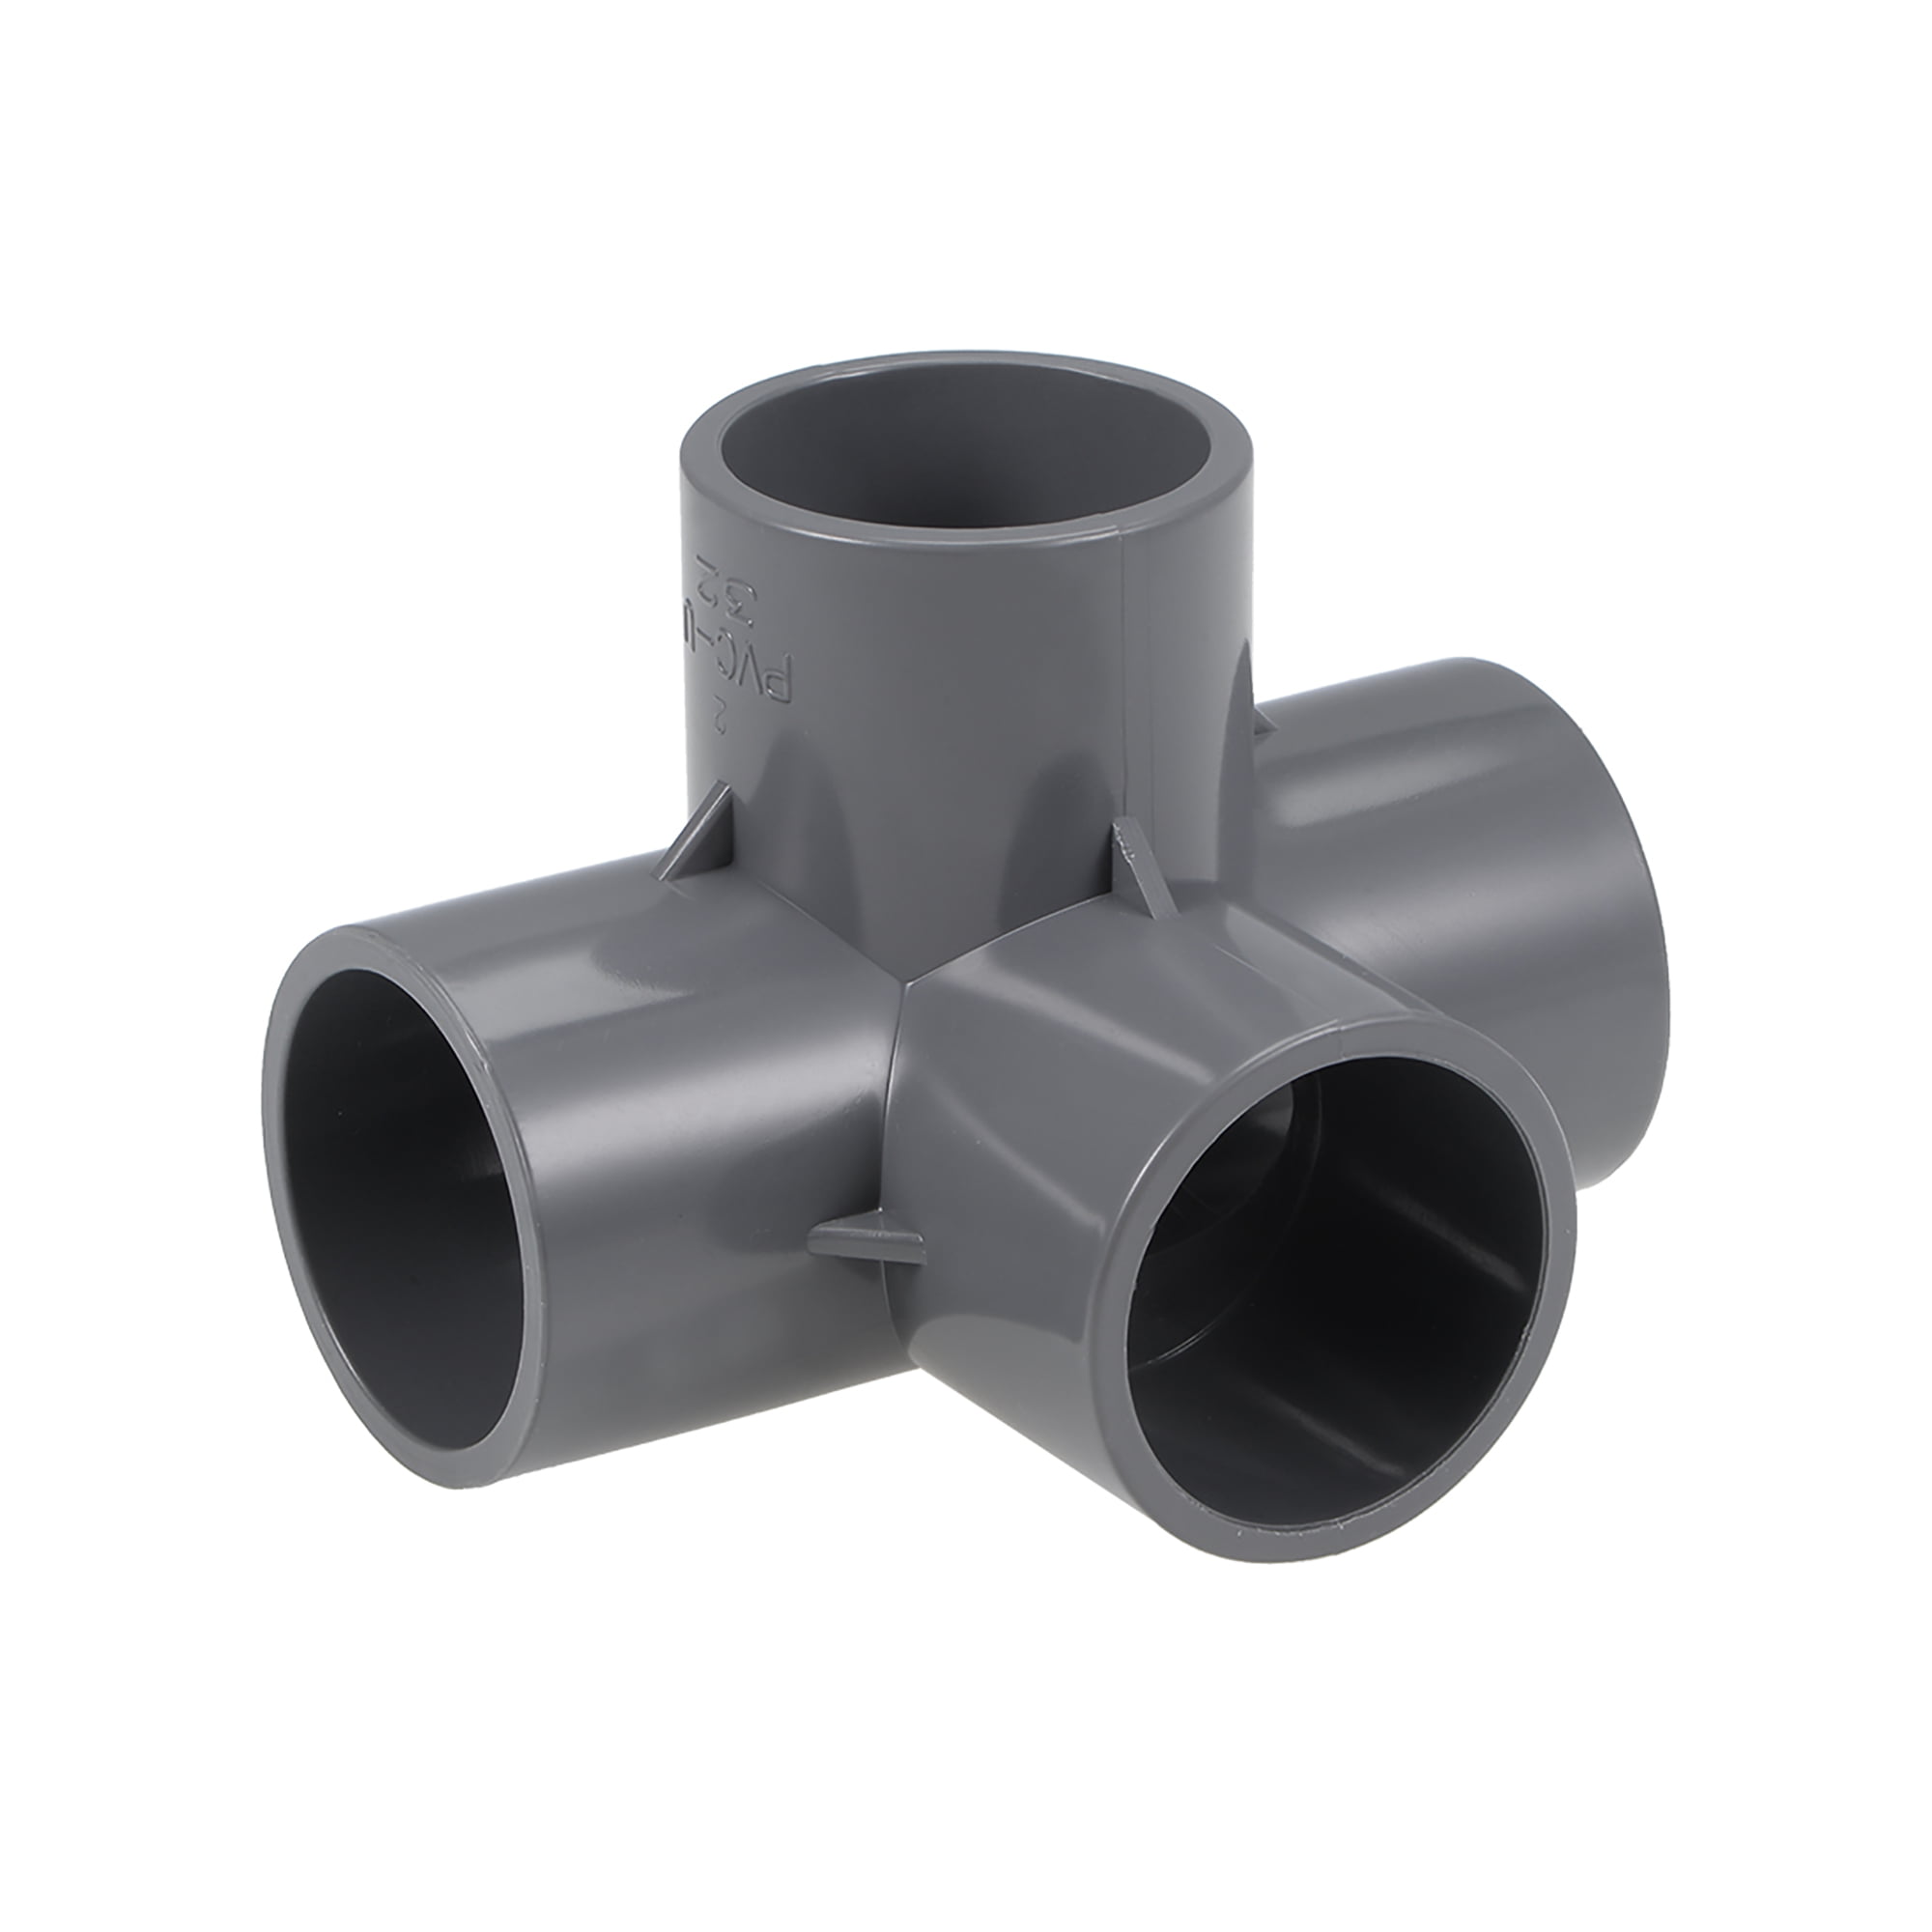 4Way Elbow PVC Pipe Fitting,Furniture Grade,1inch Size